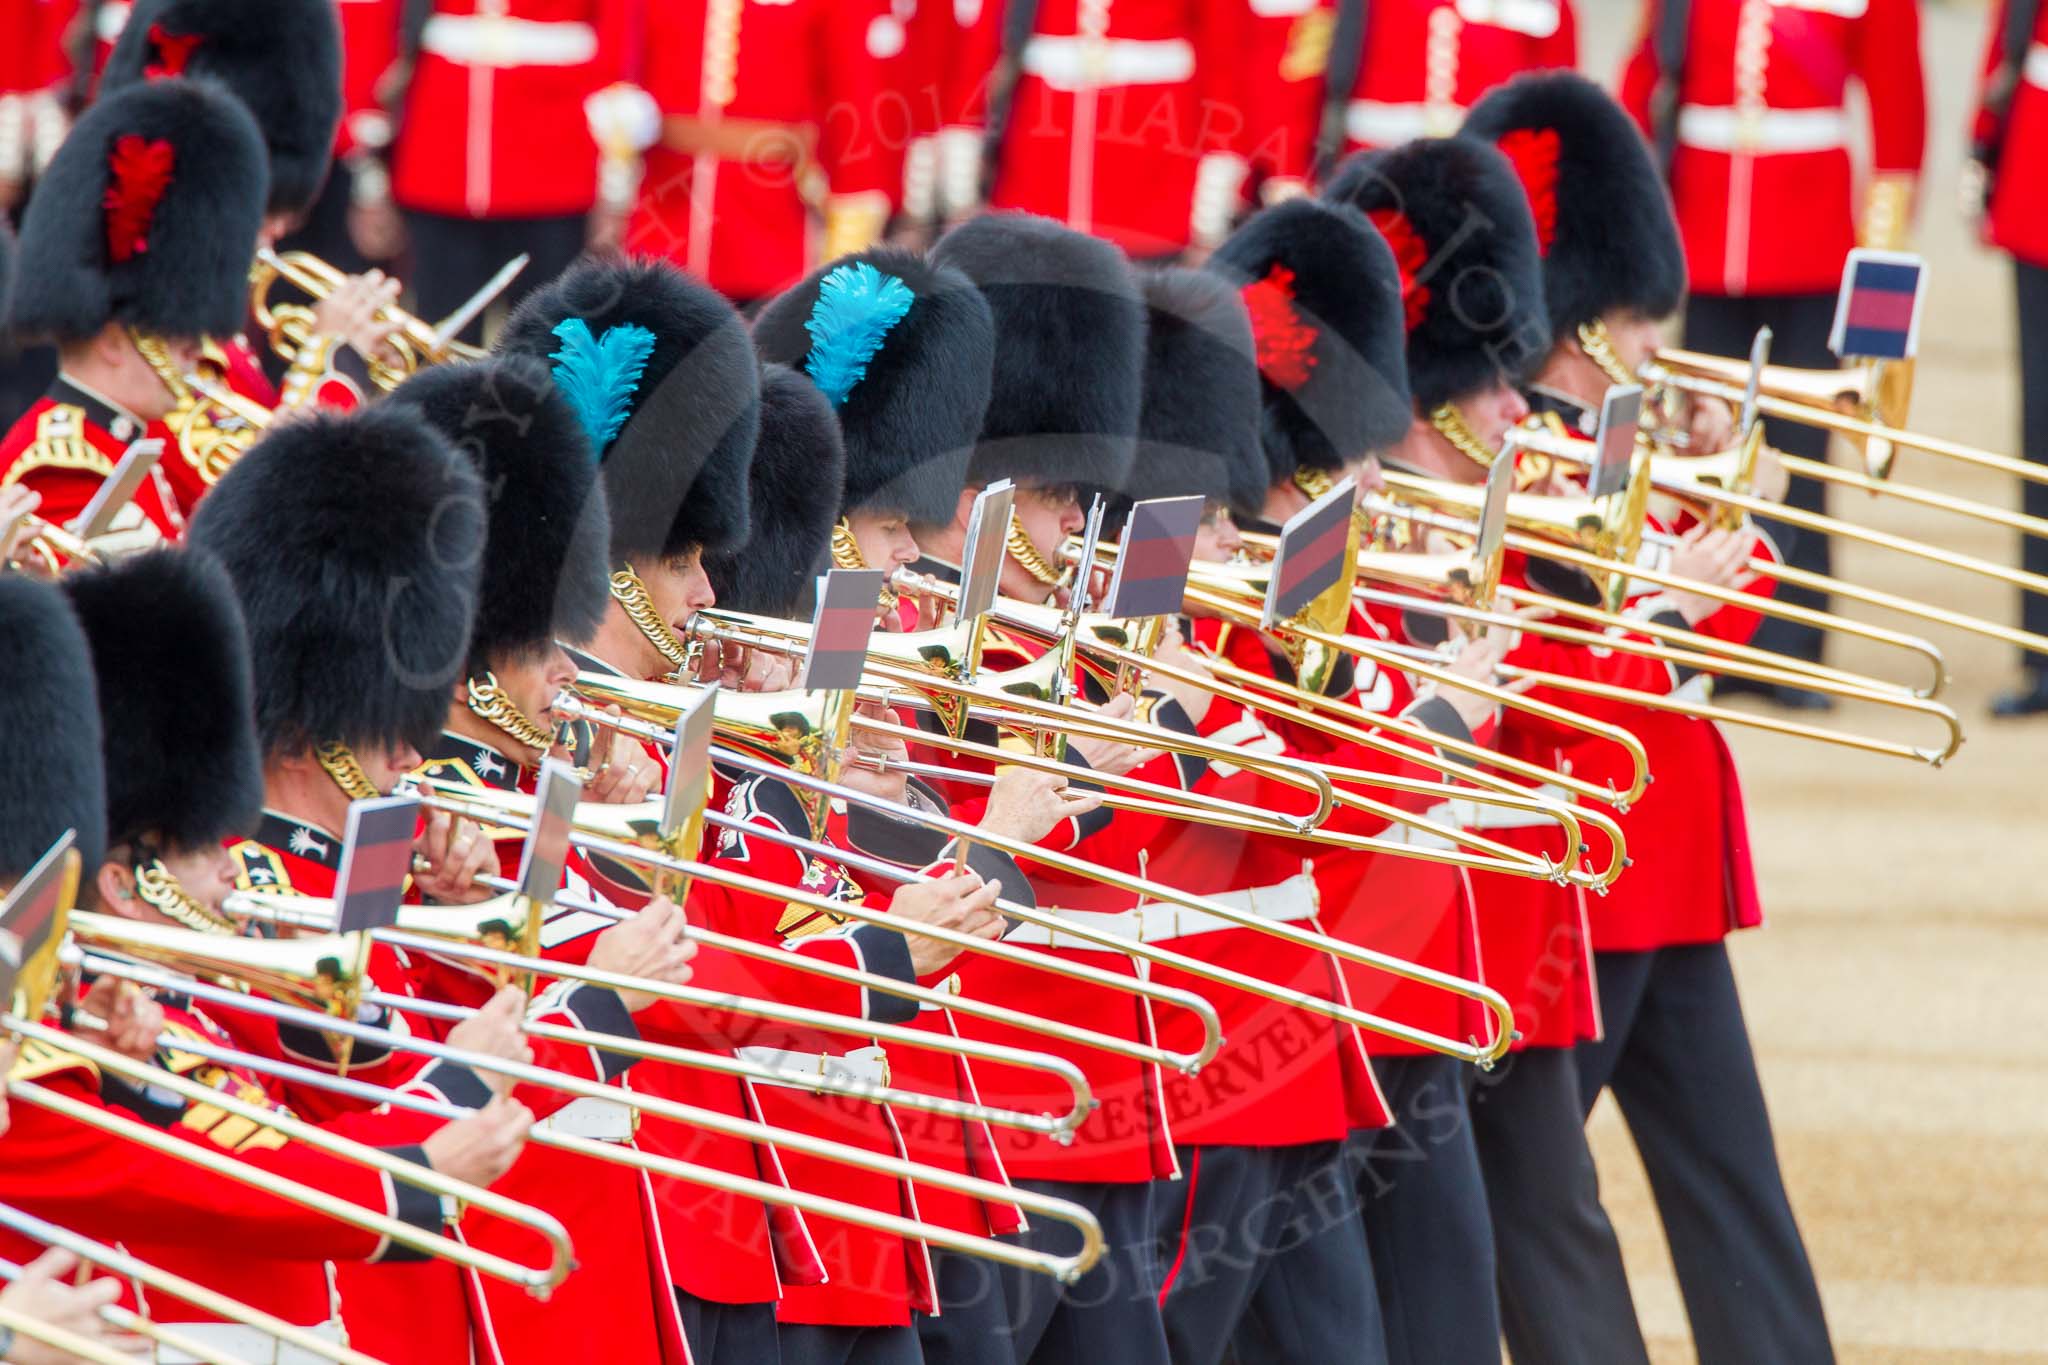 Trooping the Colour 2014.
Horse Guards Parade, Westminster,
London SW1A,

United Kingdom,
on 14 June 2014 at 11:15, image #482